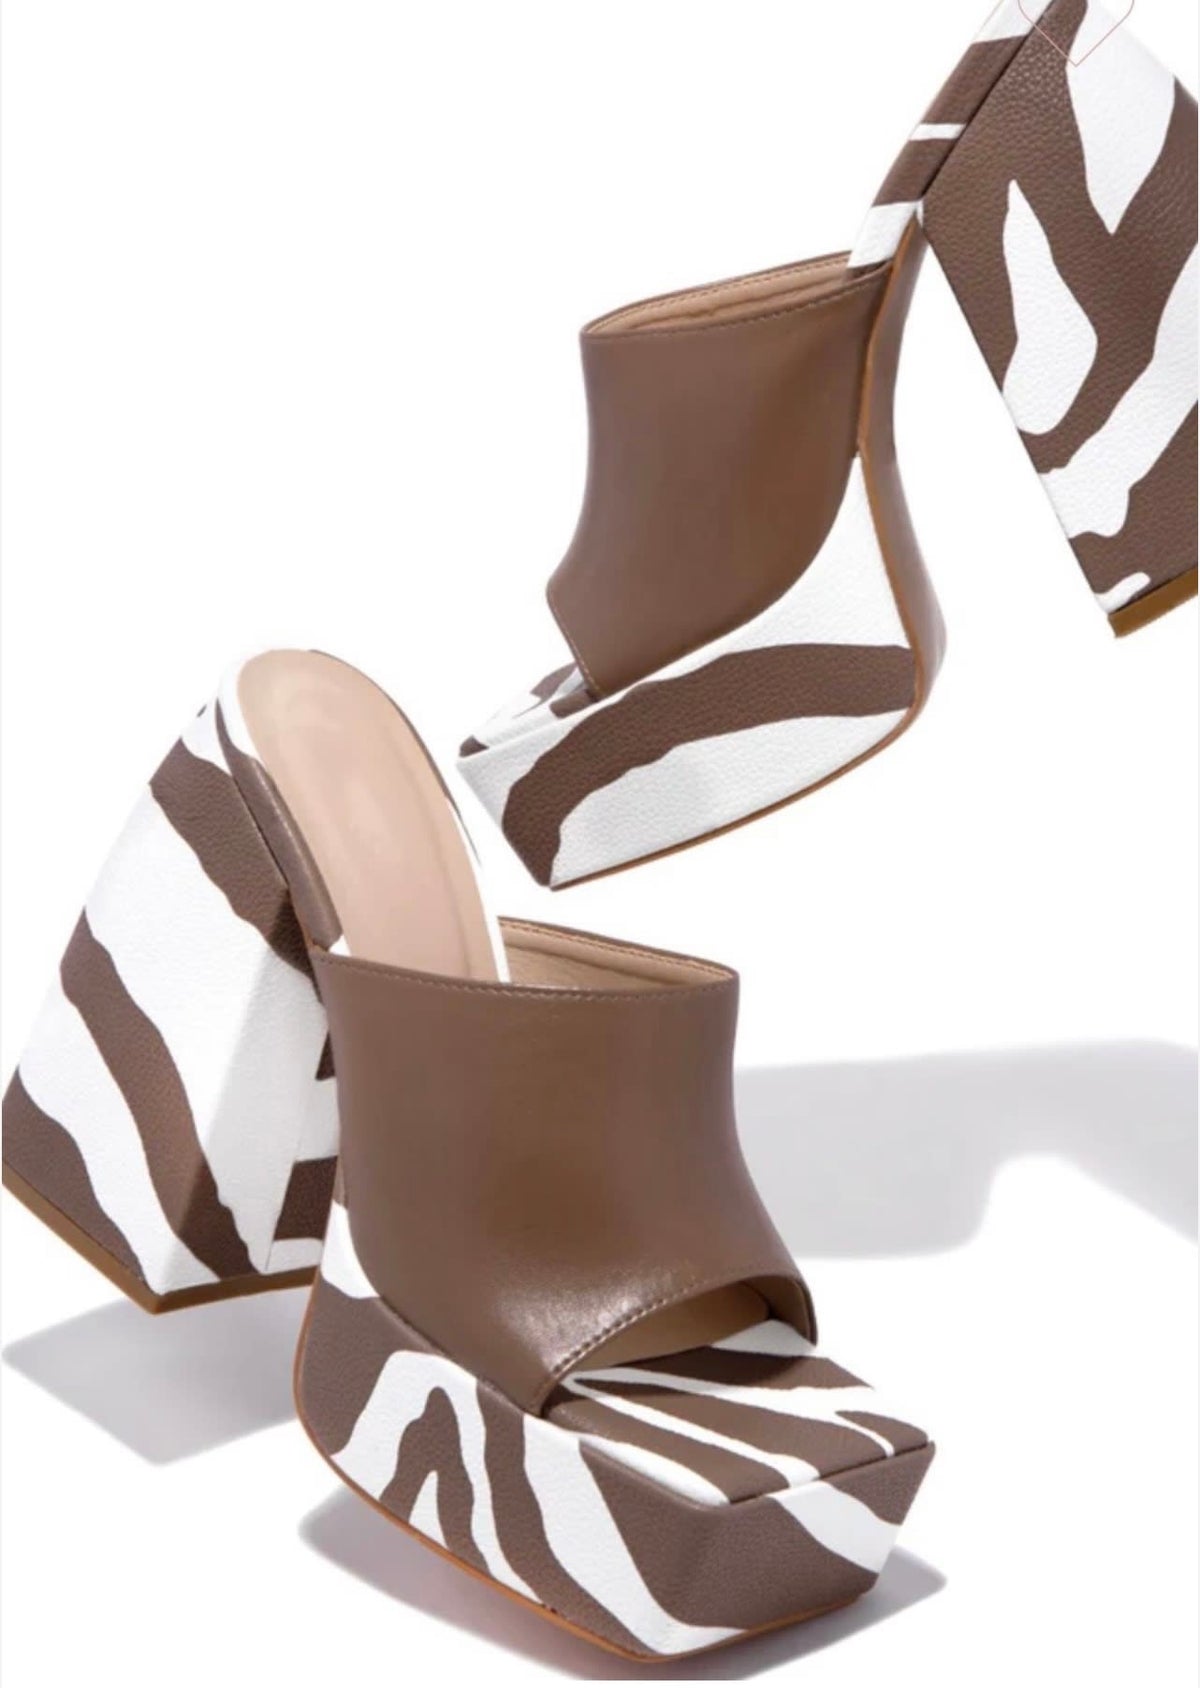 Towering Temptations: Step Up Your Fashion Game with High Platform Heels